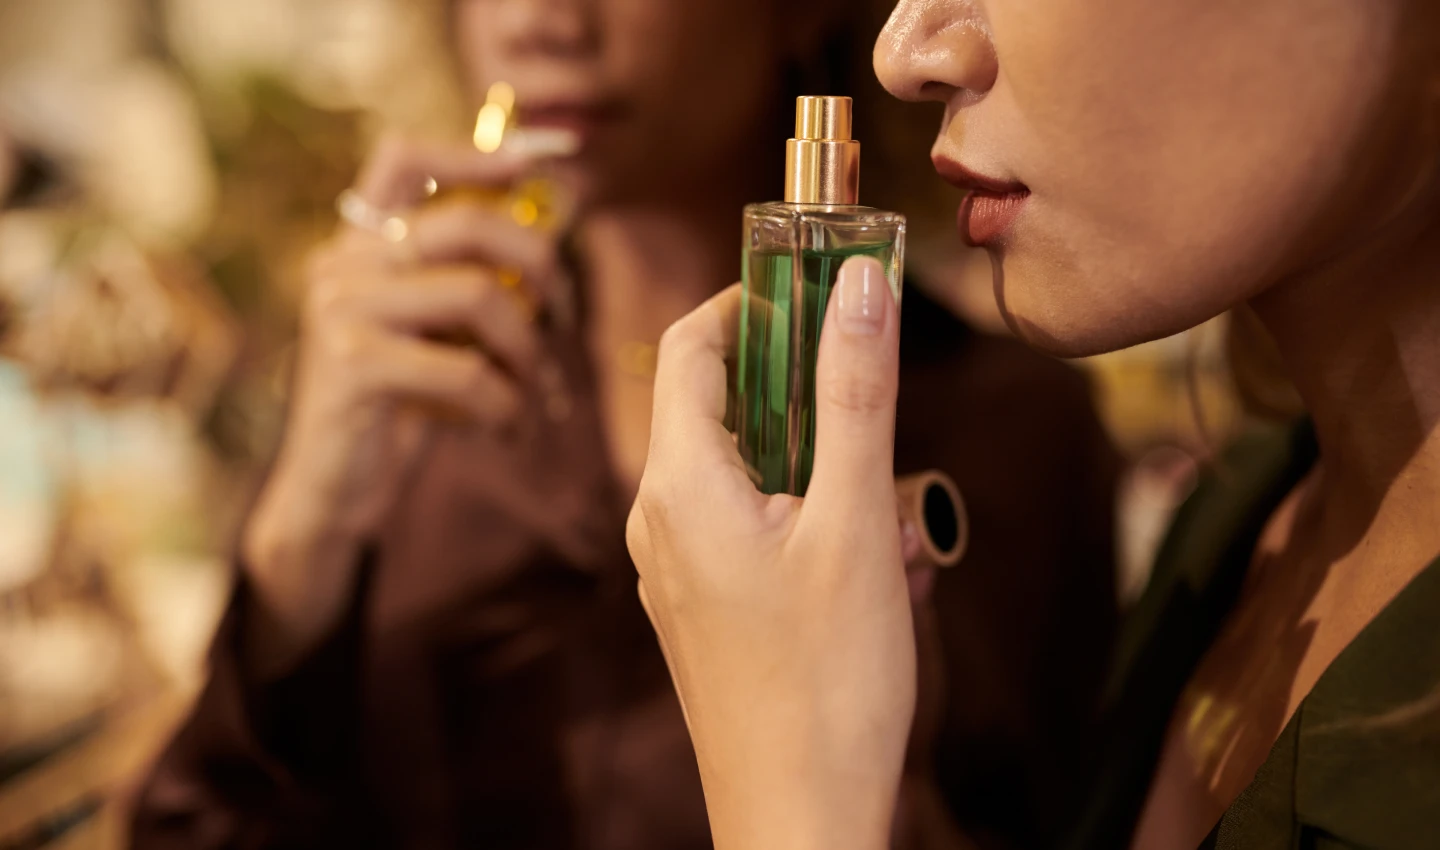 A woman cautiously smelling a perfume, representing the importance of being scent-sible about perfume safety.